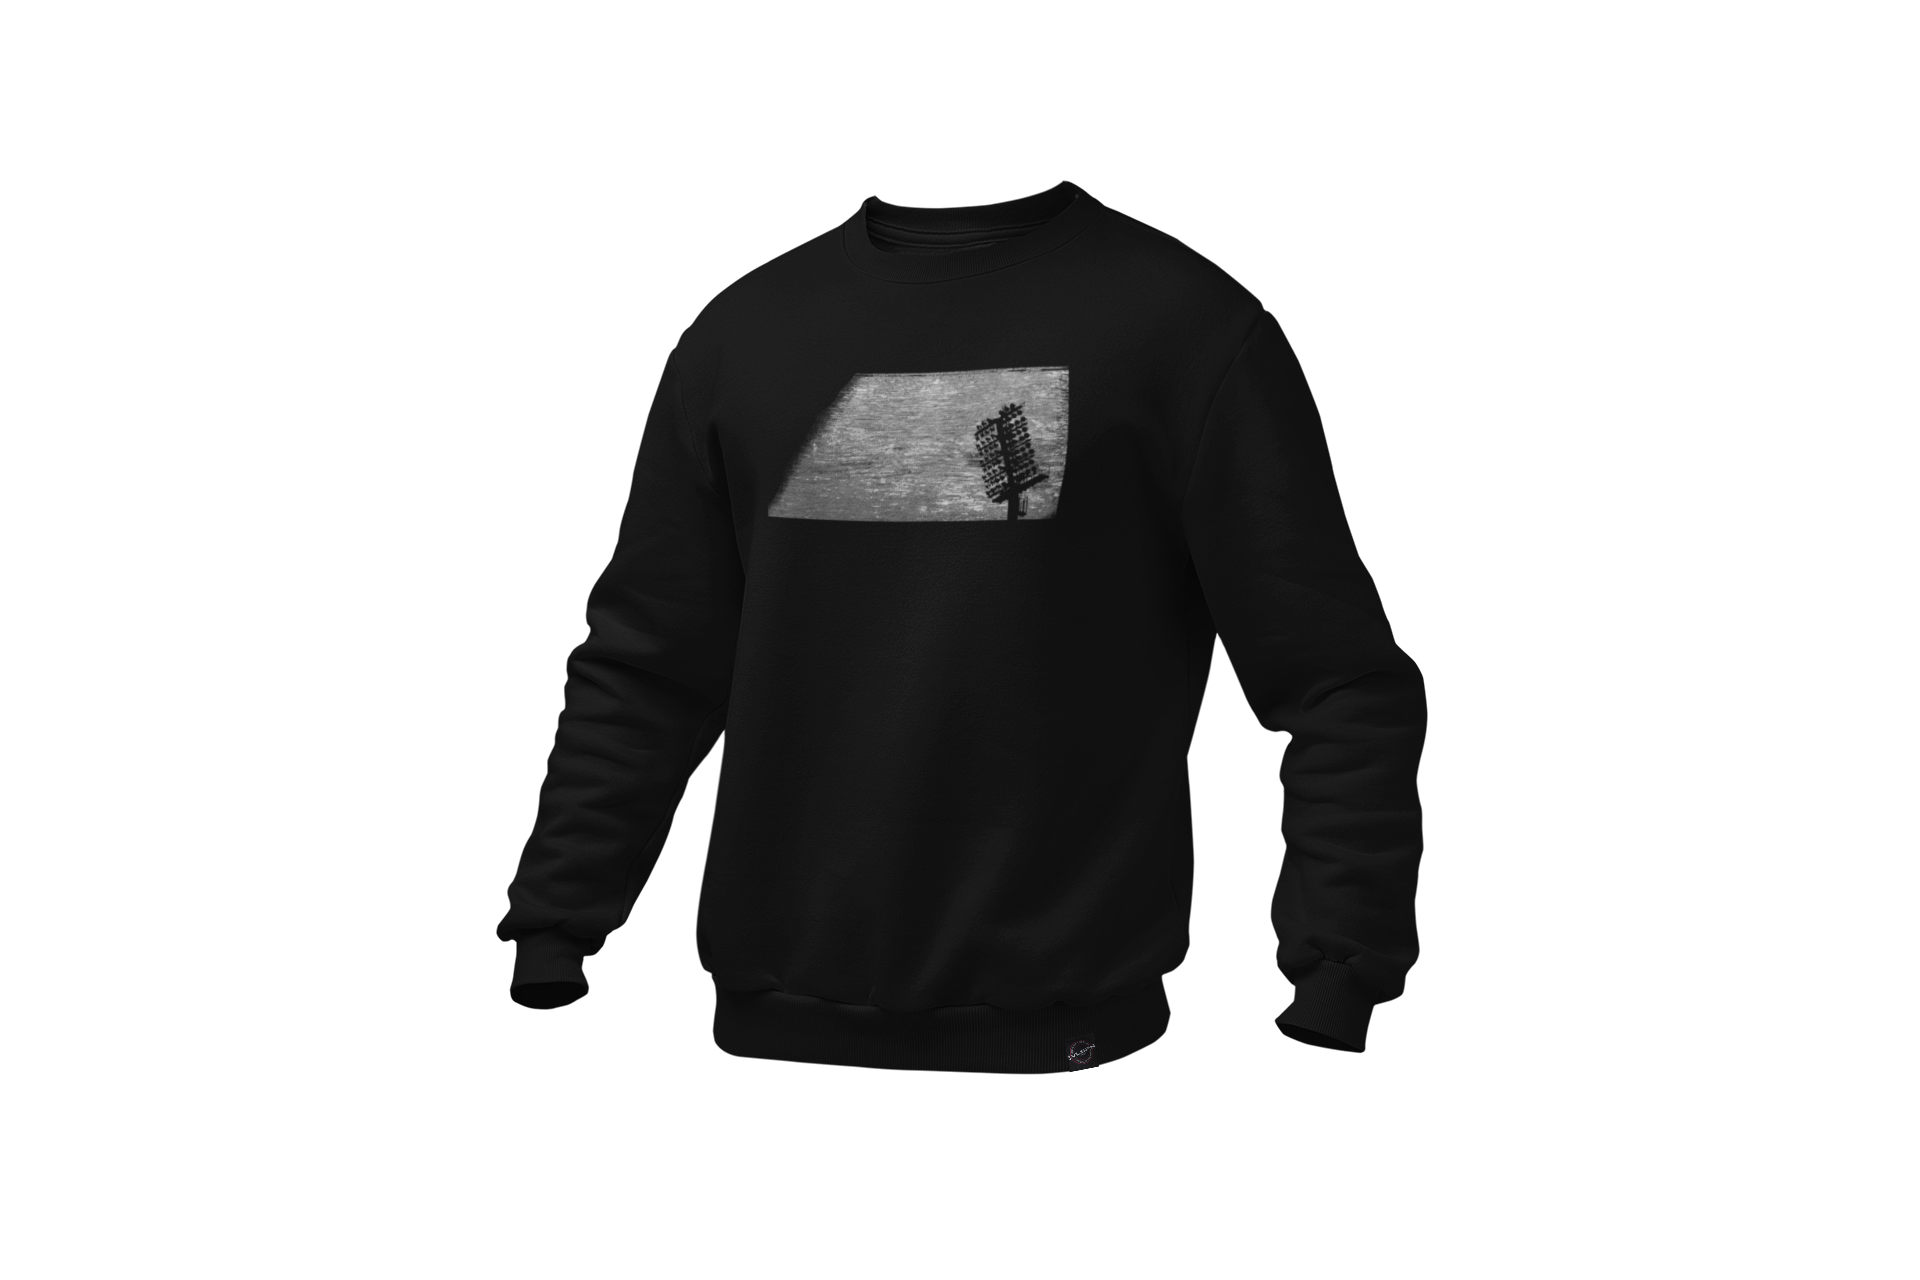 mockup-of-a-ghosted-crewneck-sweatshirt-over-a-solid-background-26960 (79).png